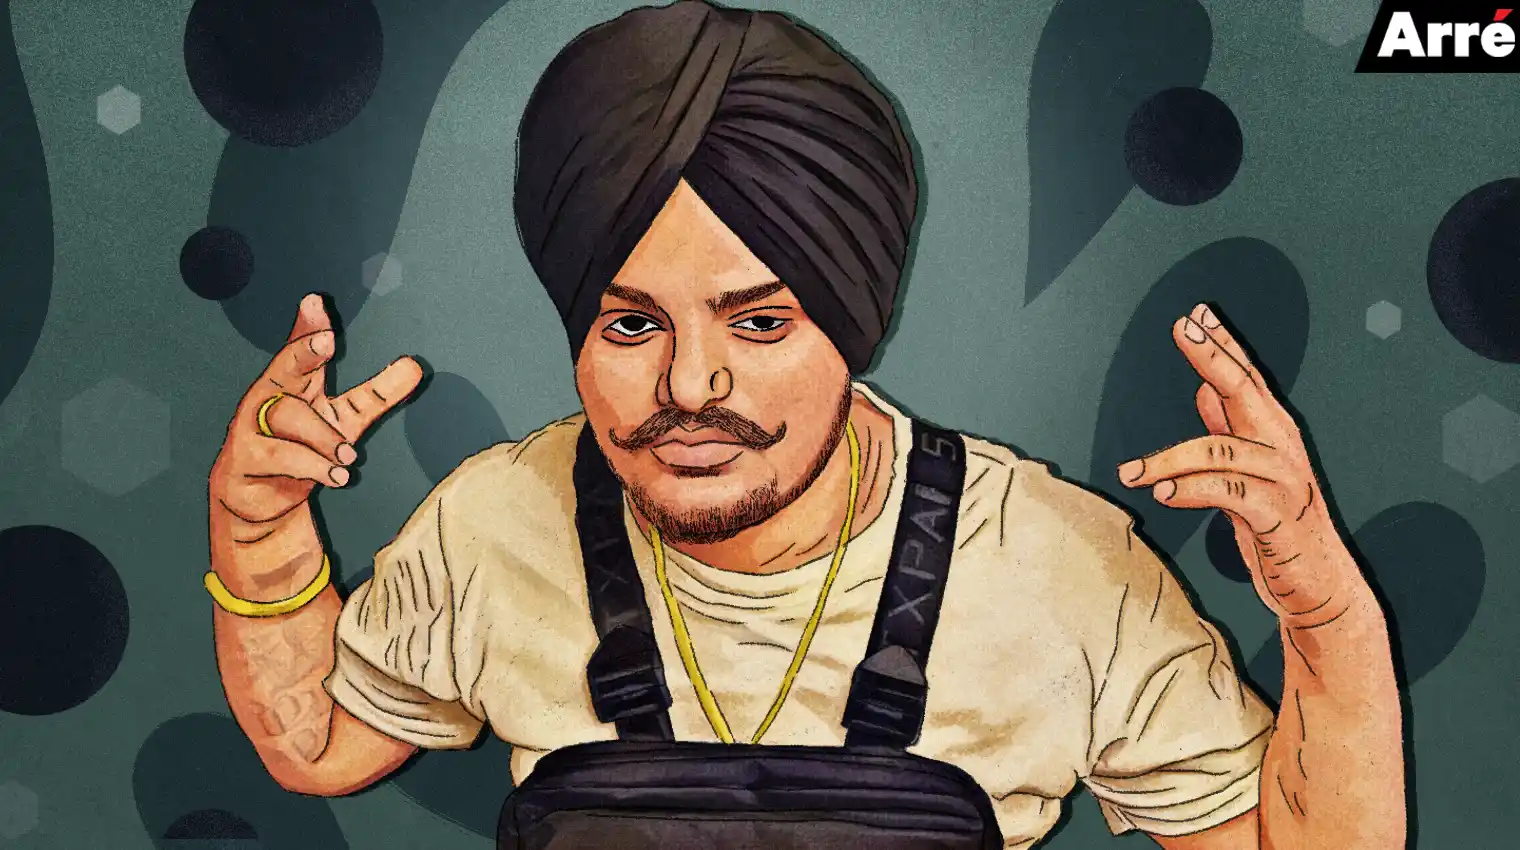 Sidhu Moose Wala's Conflicting but Significant Musical Legacy